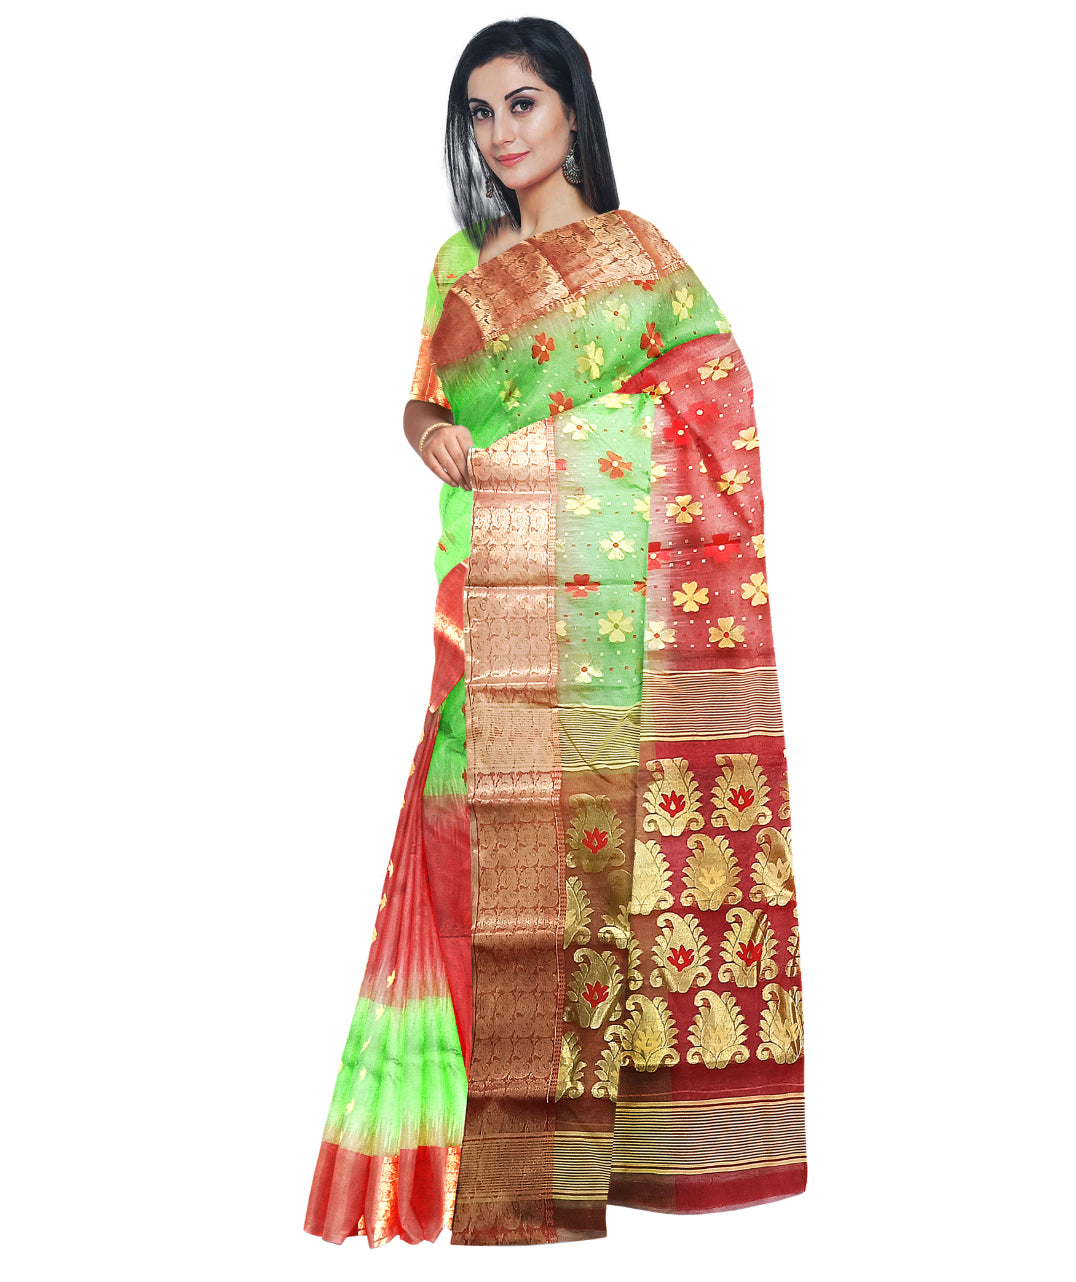 Pradip Fabrics Ethnic Women's Tant Silk Red and Soft Green Color Saree